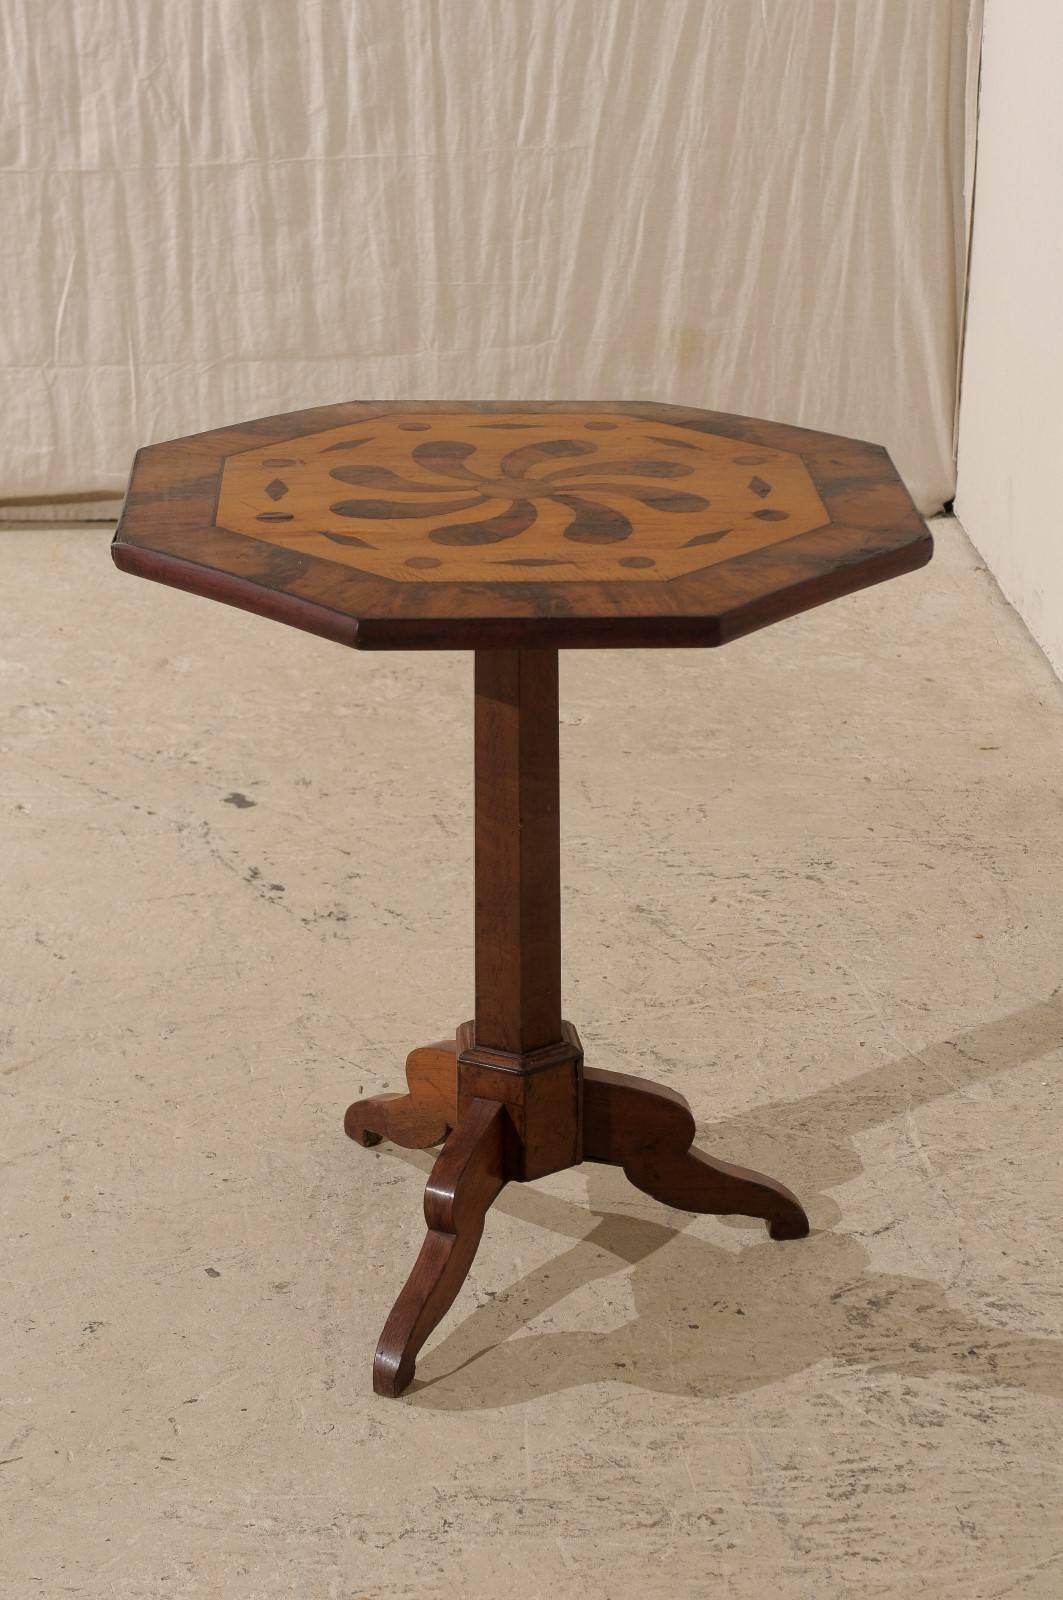 Inlay Italian 19th Century Octagonal Occasional Table with Inlaid Floral Design